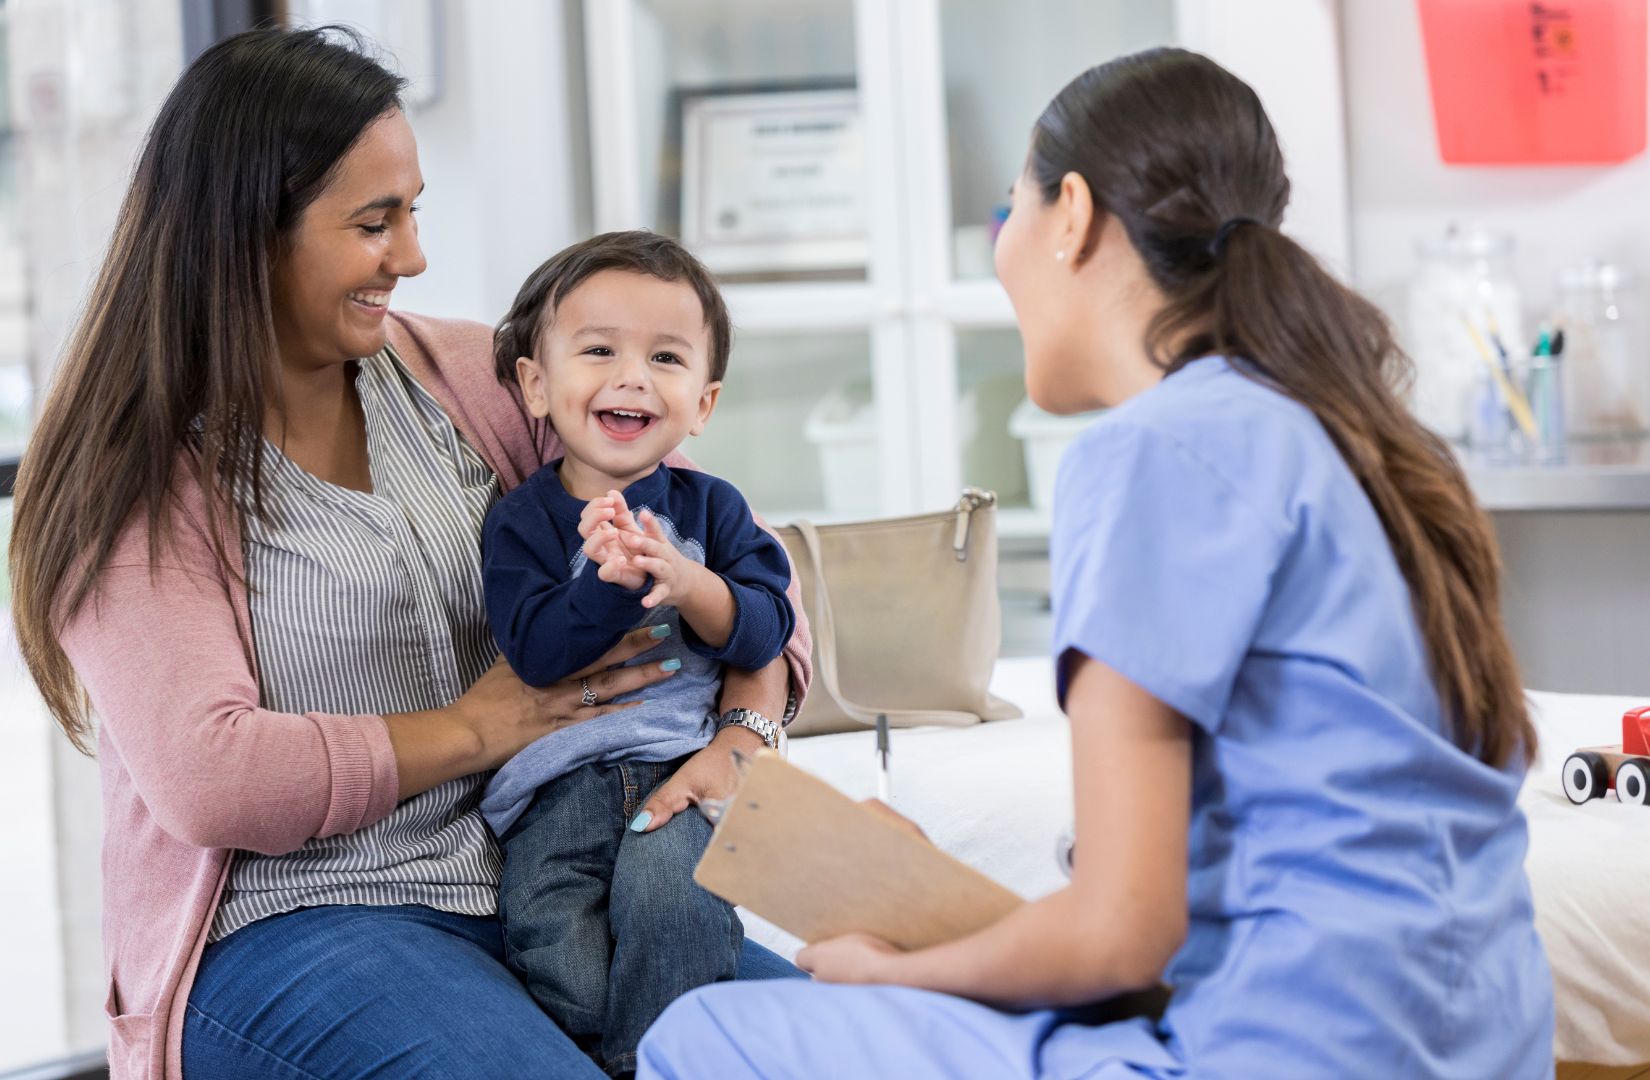 A smiling mother and toddler son sits in an exam room and listen to a healthcare professional.